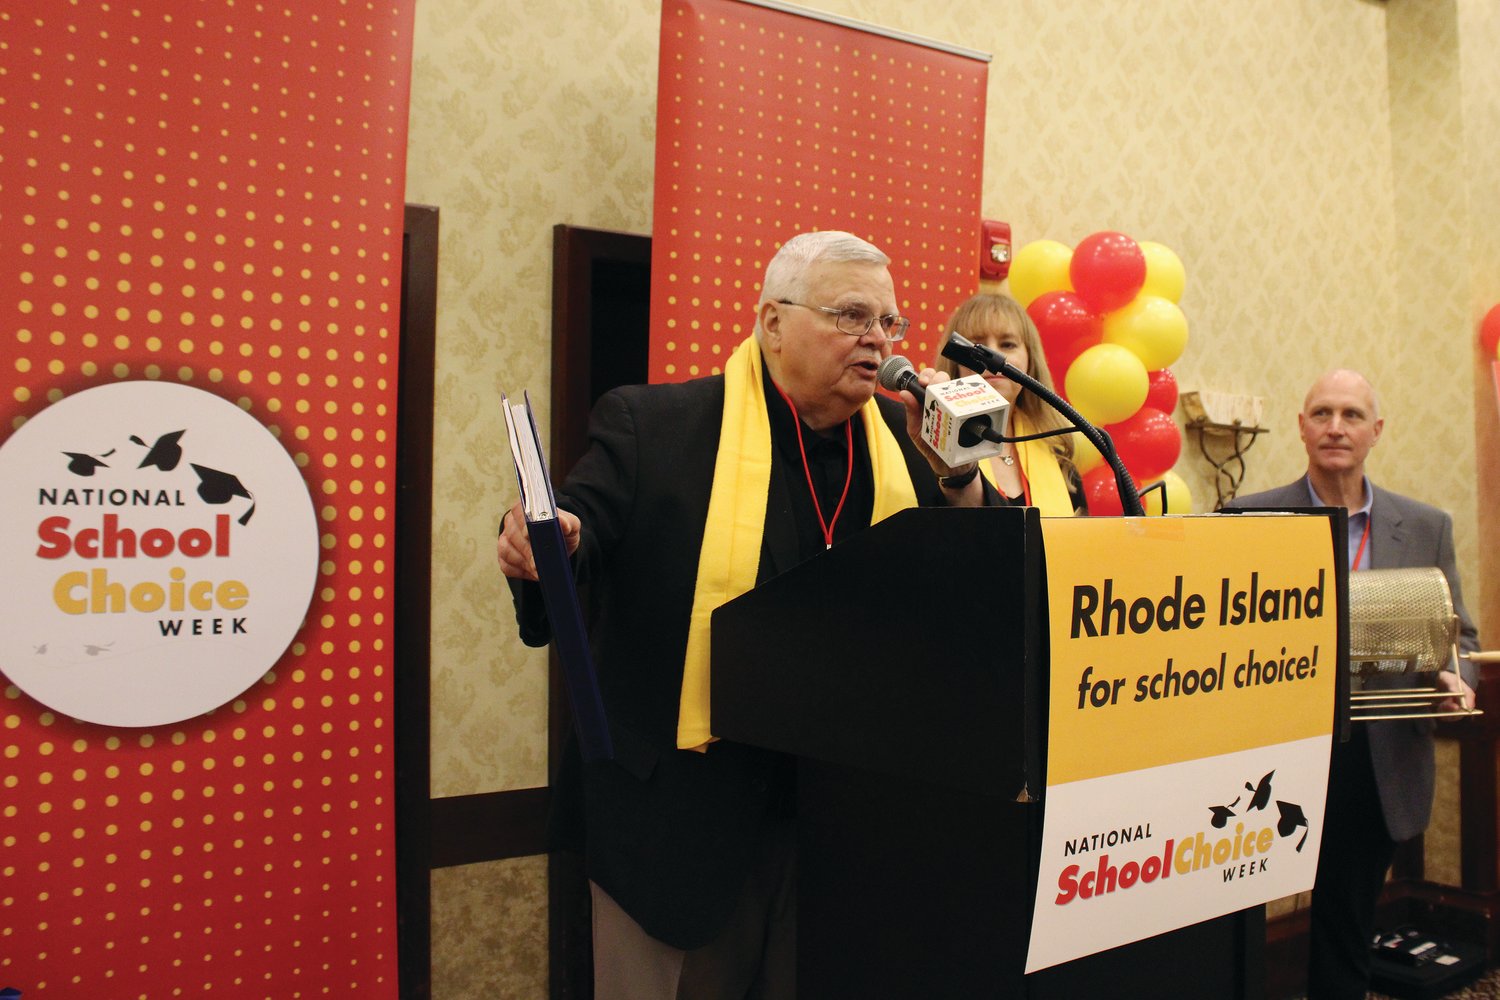 Ed Bastia, founder of Rhode Island Families for School Choice, explains the importance of informing parents that they have a choice in their children’s education.